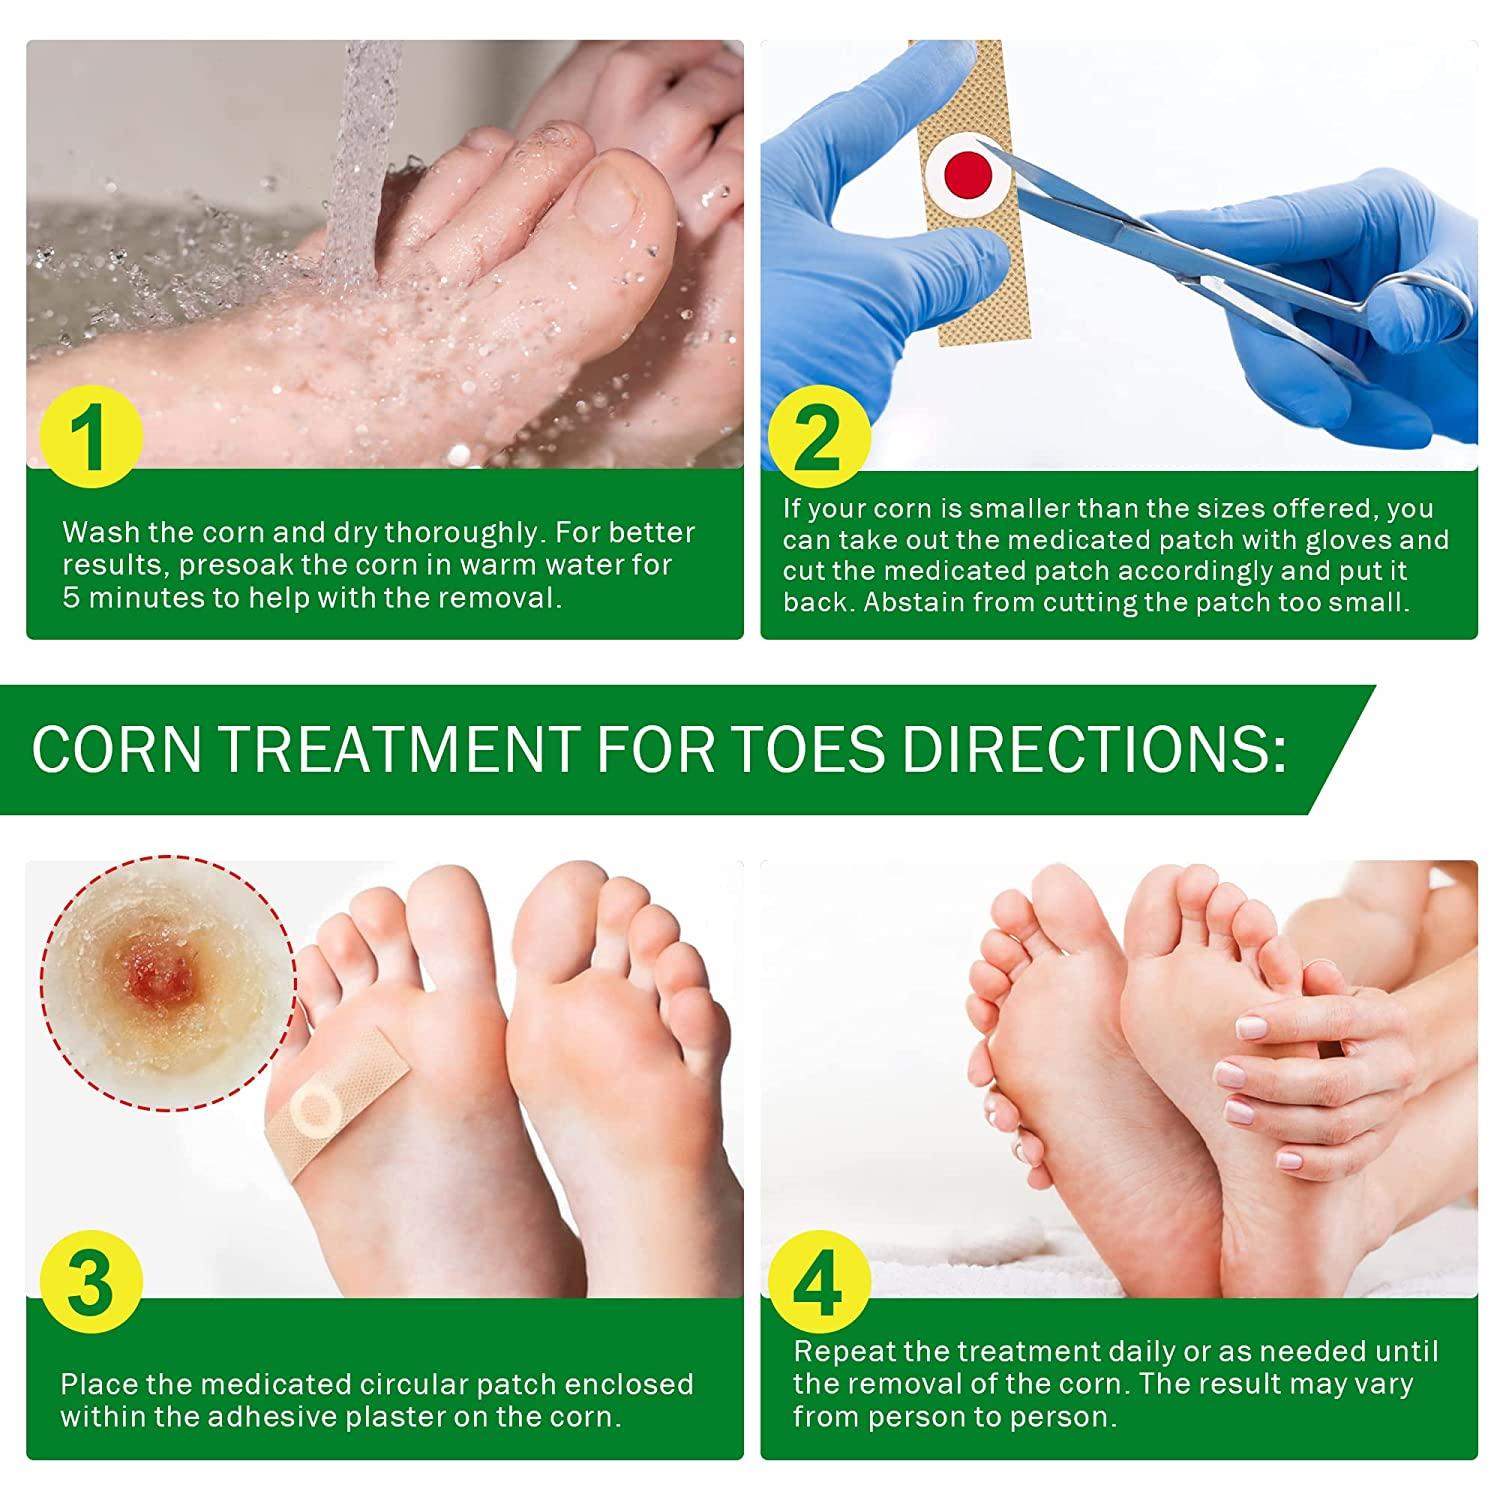 Corn Removers for Feet & Toes, Corn Removers with Salicylic Acid, Corn  Removers for Toes Pads, Foot Corn Remover & Callous Remover, Corn Pads for  Toes & Feet, 24 Pack Red